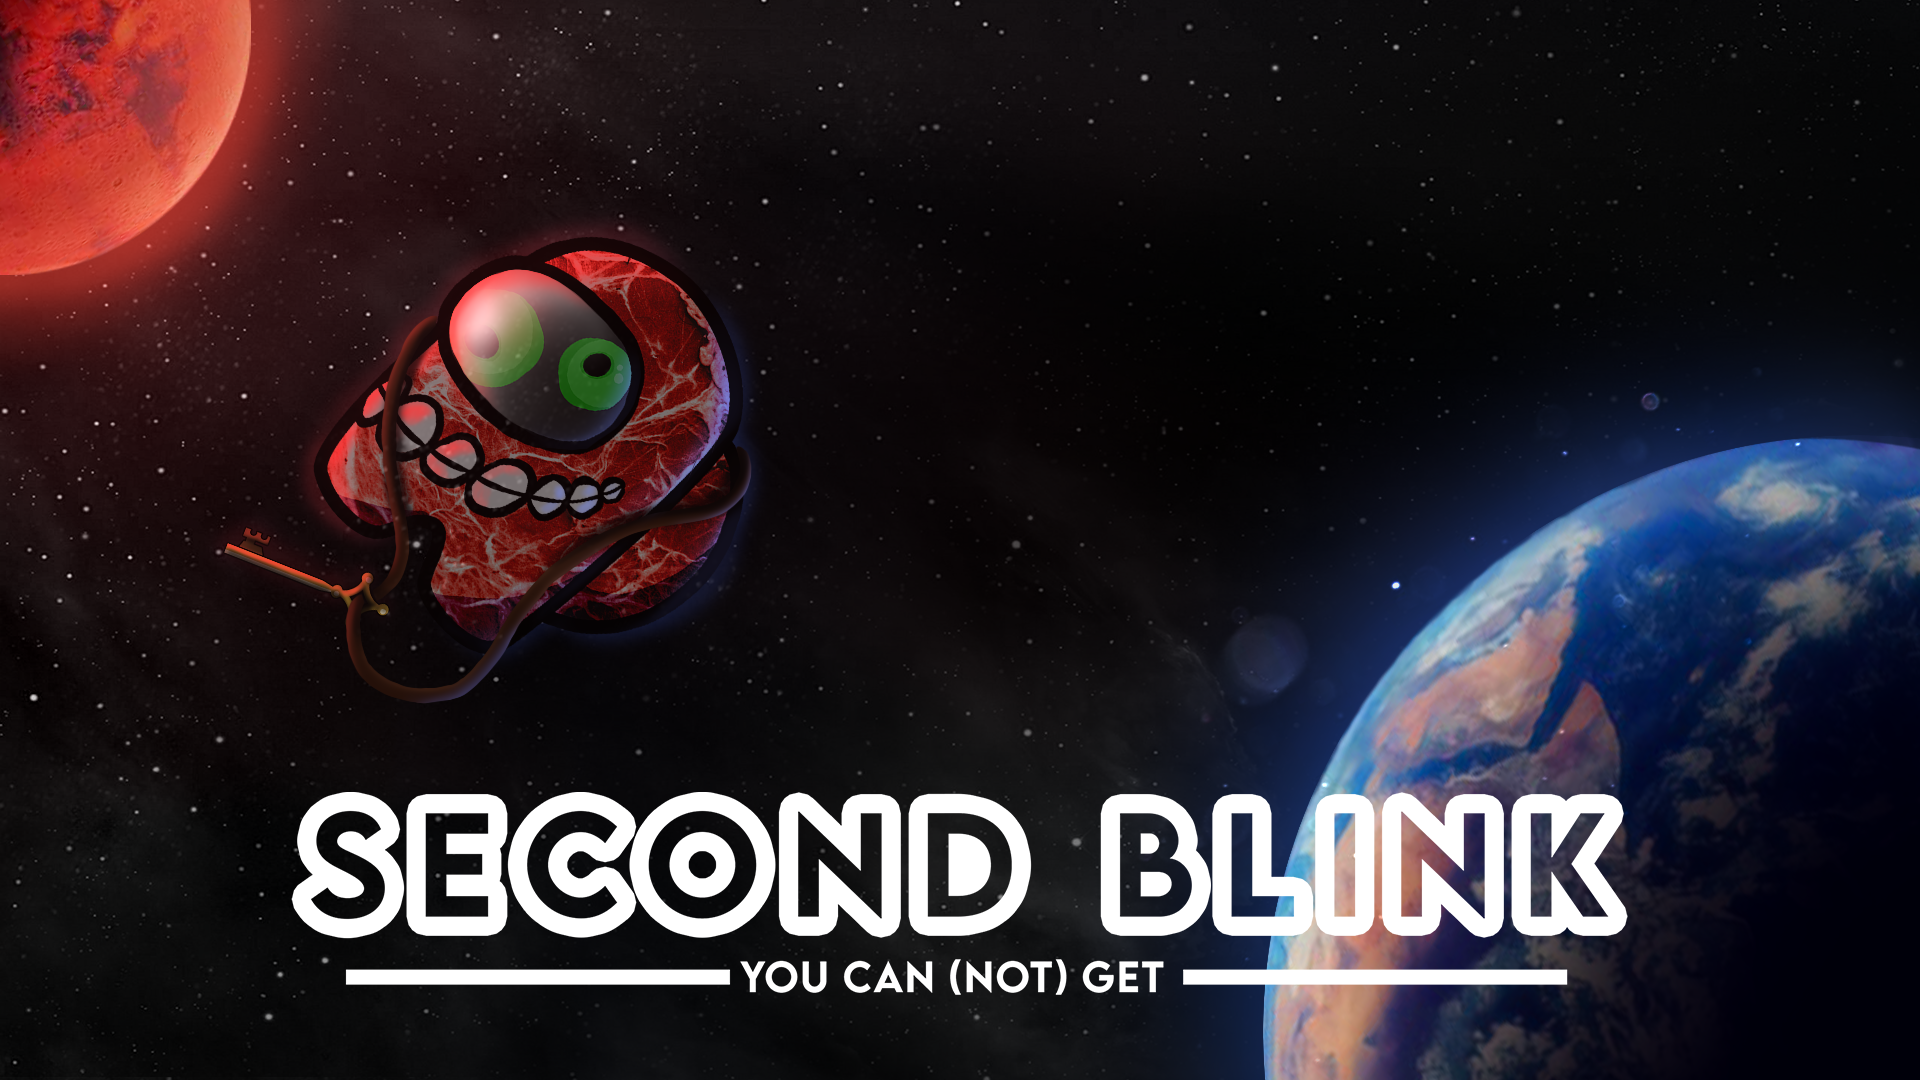 Second Blink:You Can (Not) Get